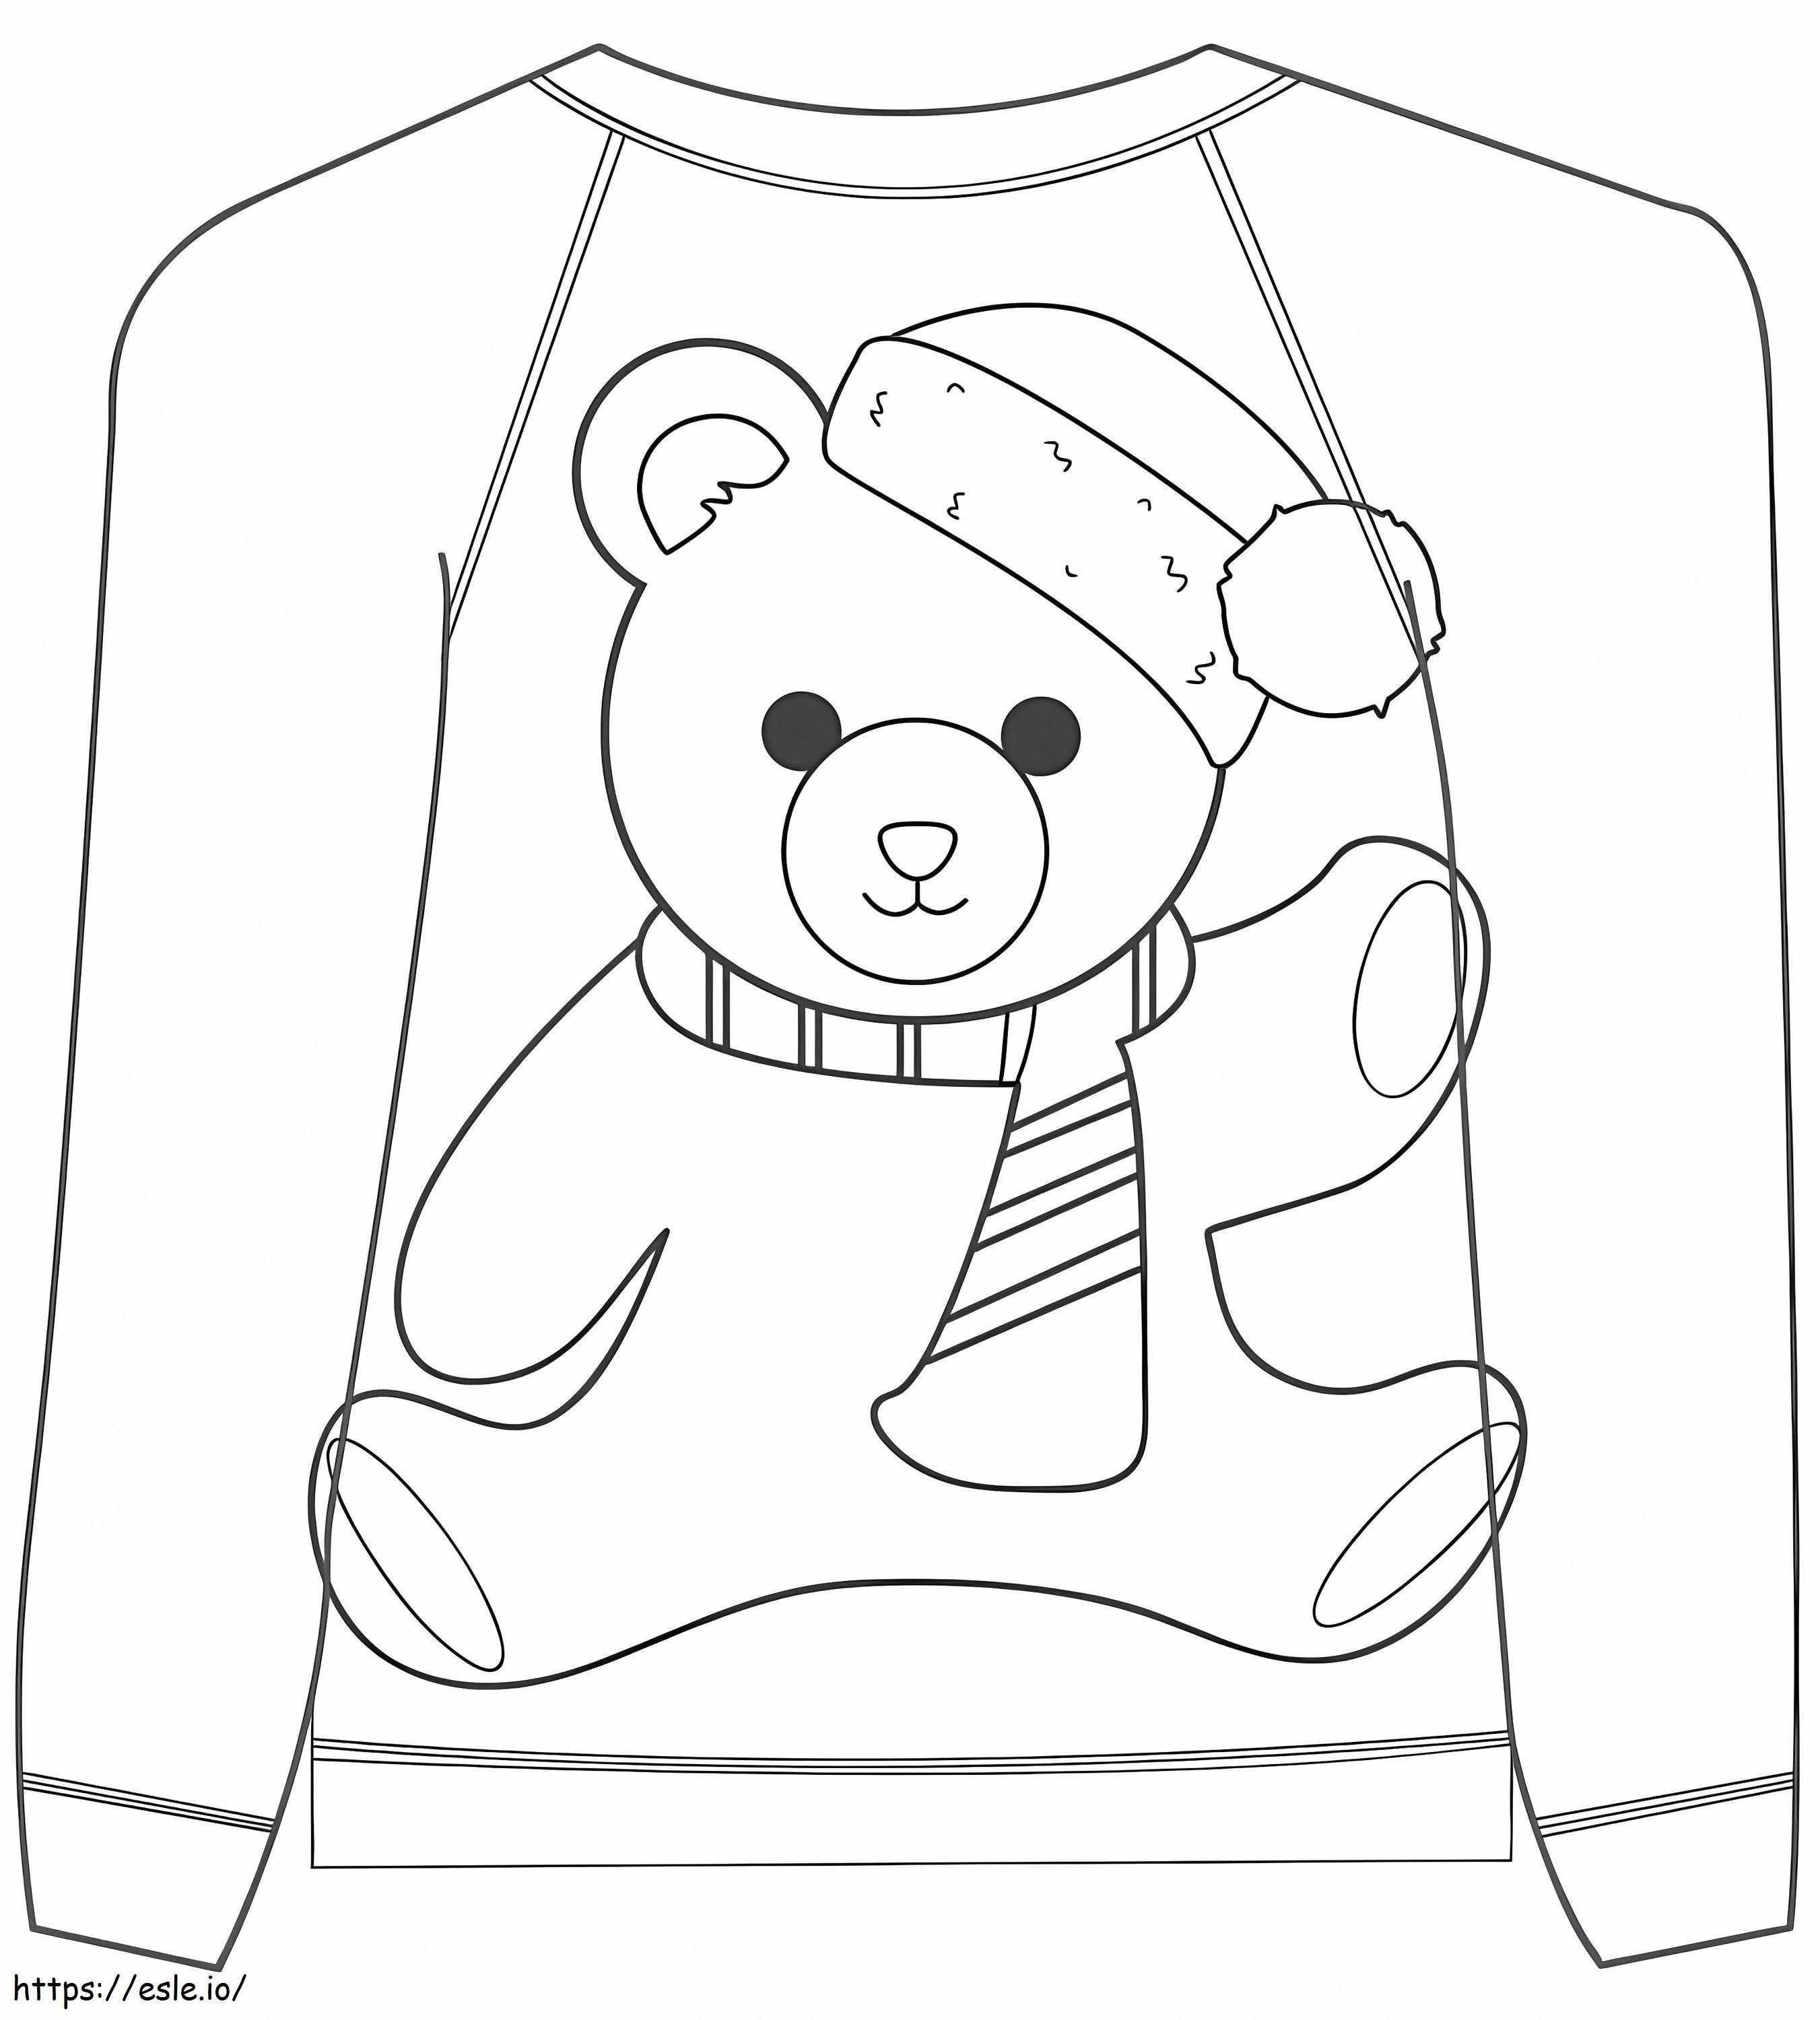 Christmas Sweater With Teddy Bear coloring page